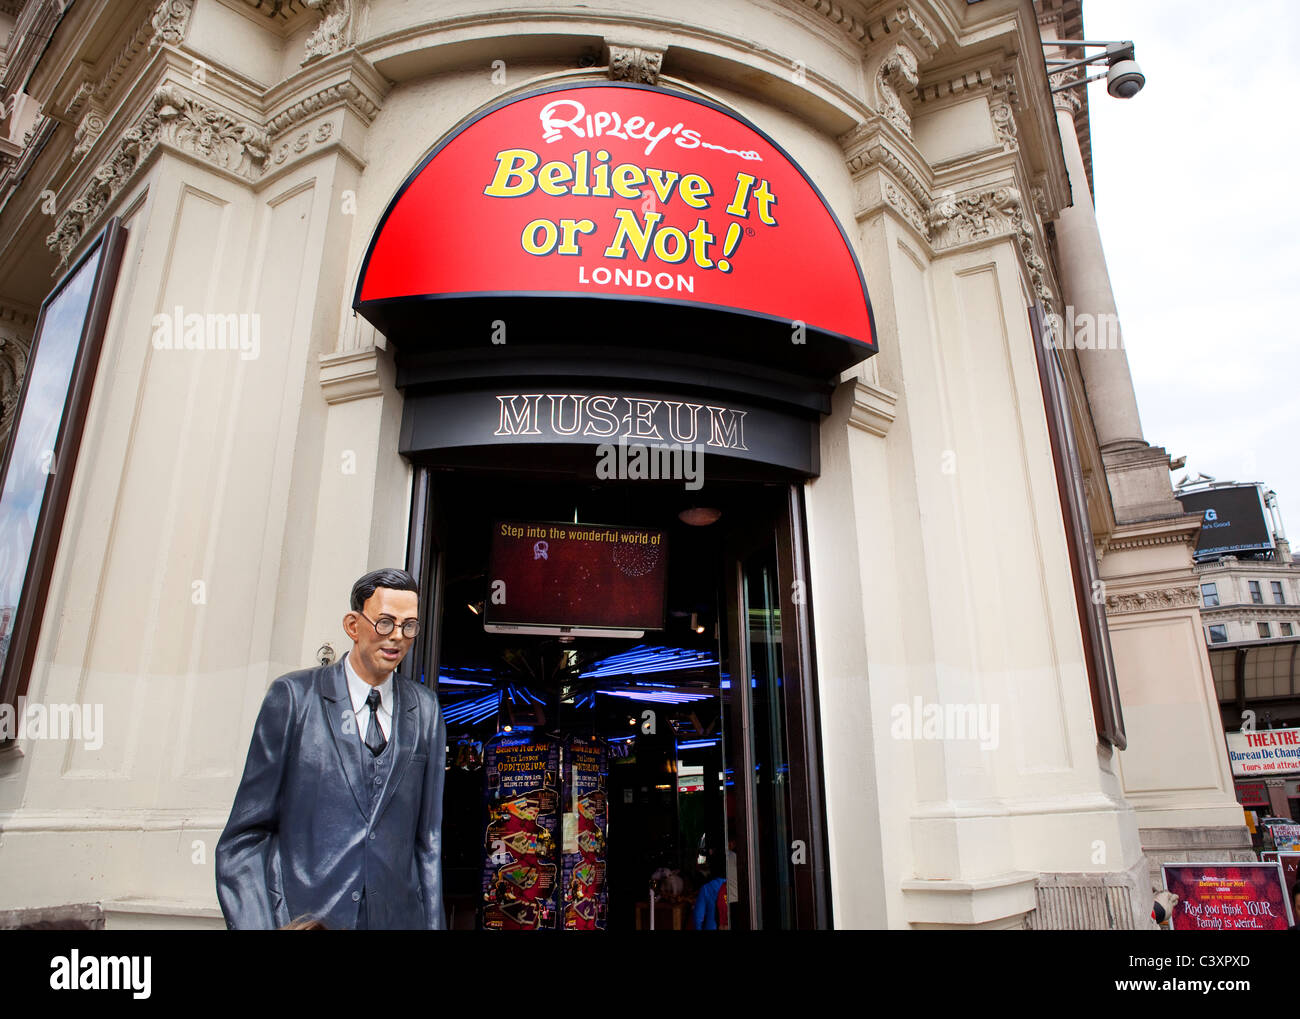 Ripley's, Believe it or not! tourist attraction in London. Piccadilly Circus. Stock Photo